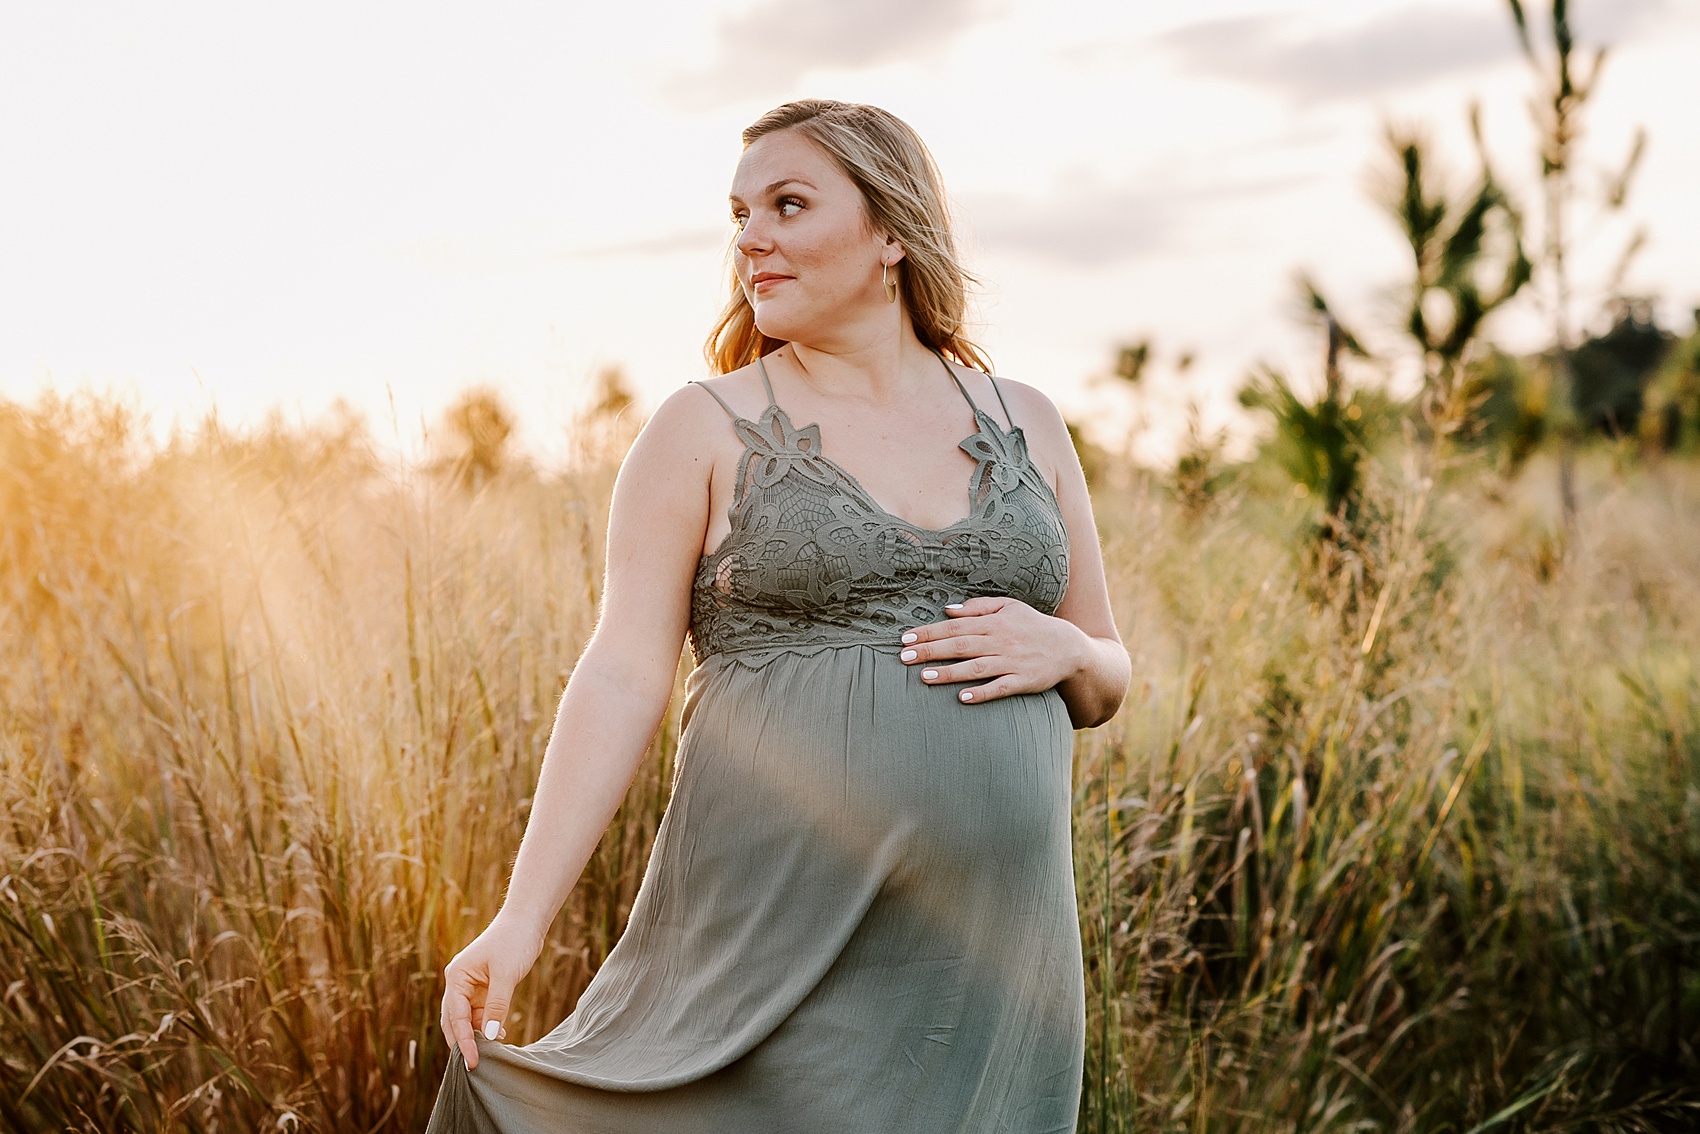 A mom to be in a green maternity dress plays with her dress as she walks through a field of tall grass at sunset